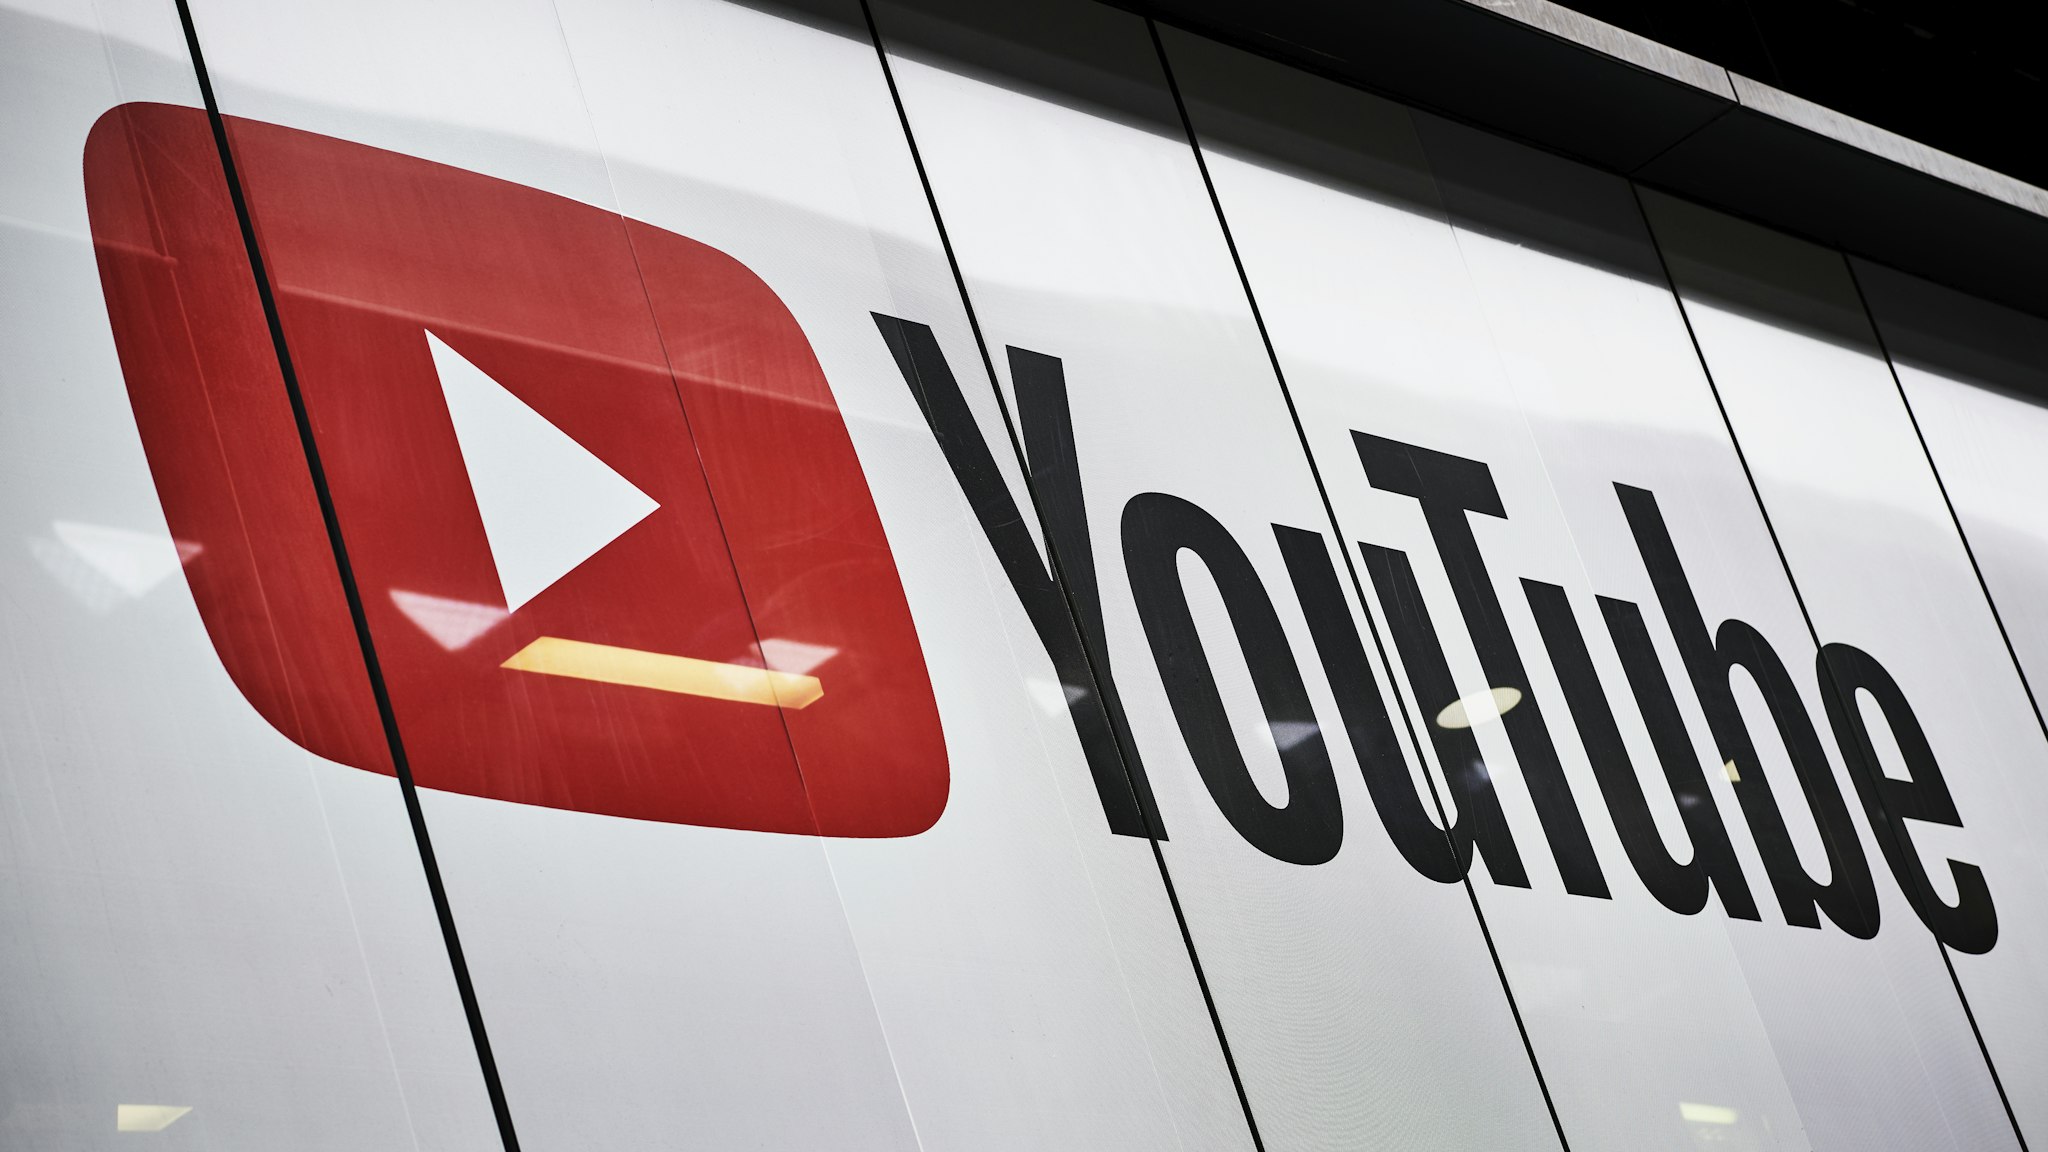 LONDON, UNITED KINGDOM - JUNE 4: Detail of the YouTube logo outside the YouTube Space studios in London, taken on June 4, 2019. (Photo by Olly Curtis/Future via Getty Images)